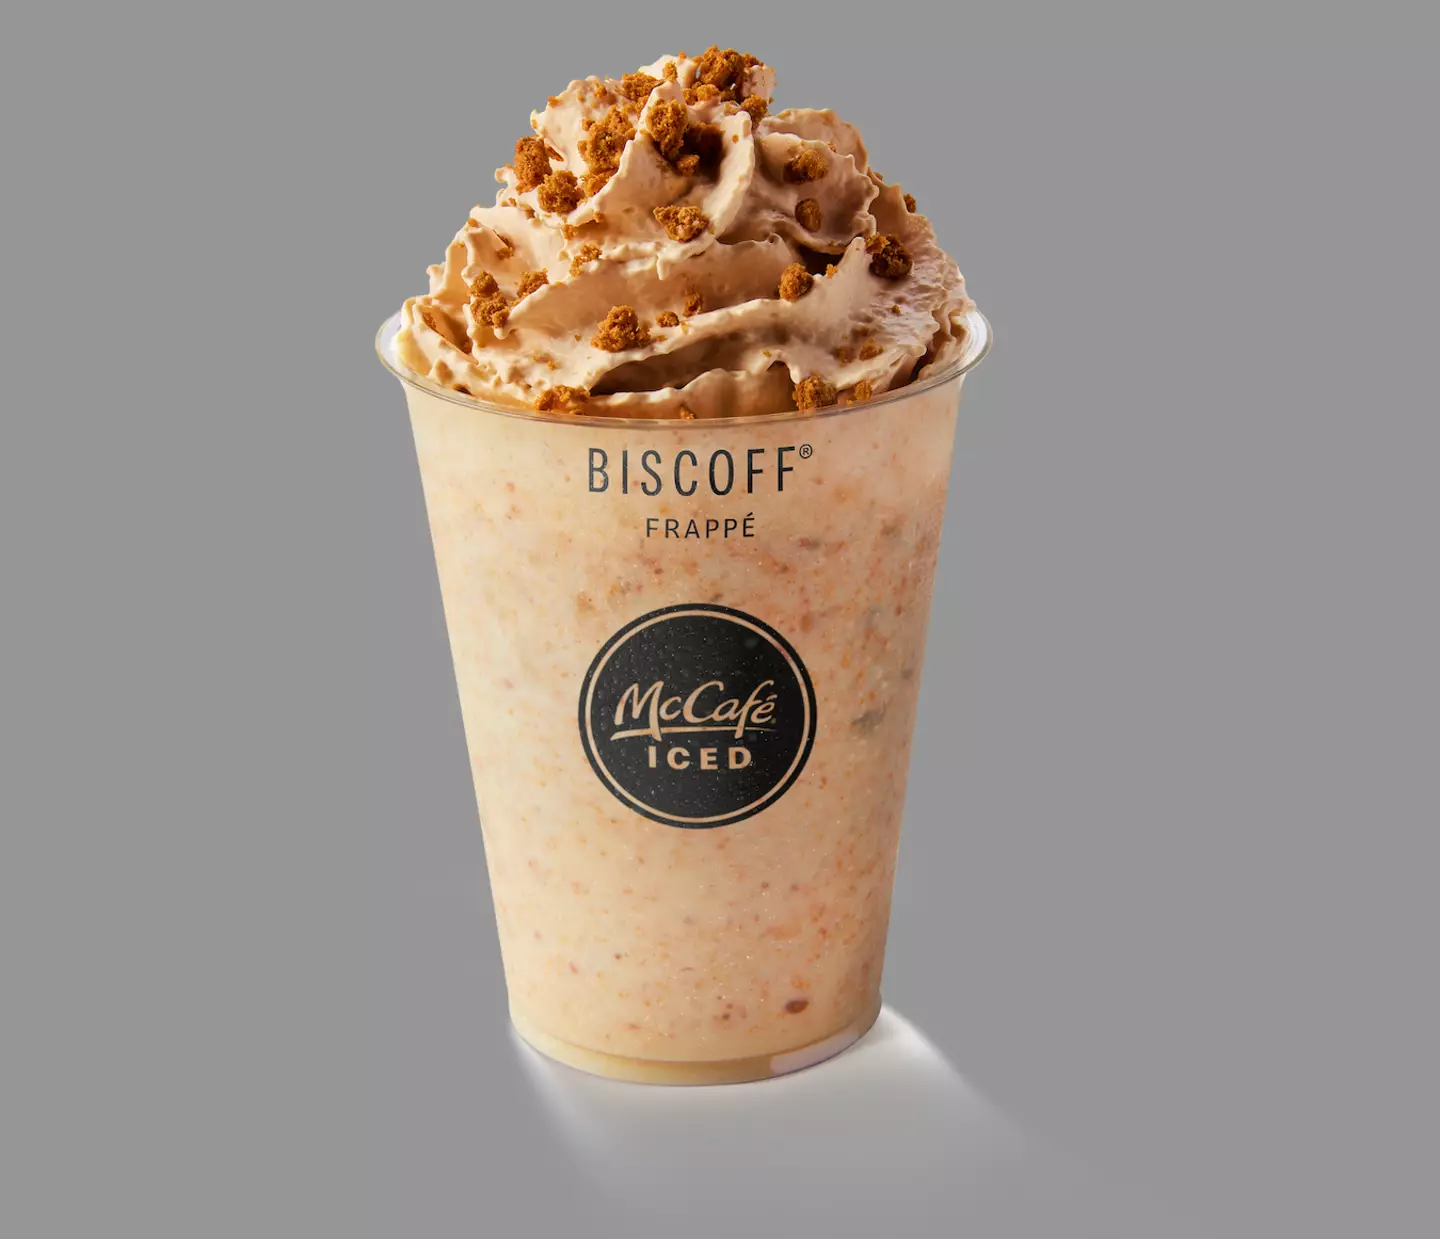 The Biscoff Frappe will drop on 17 April.